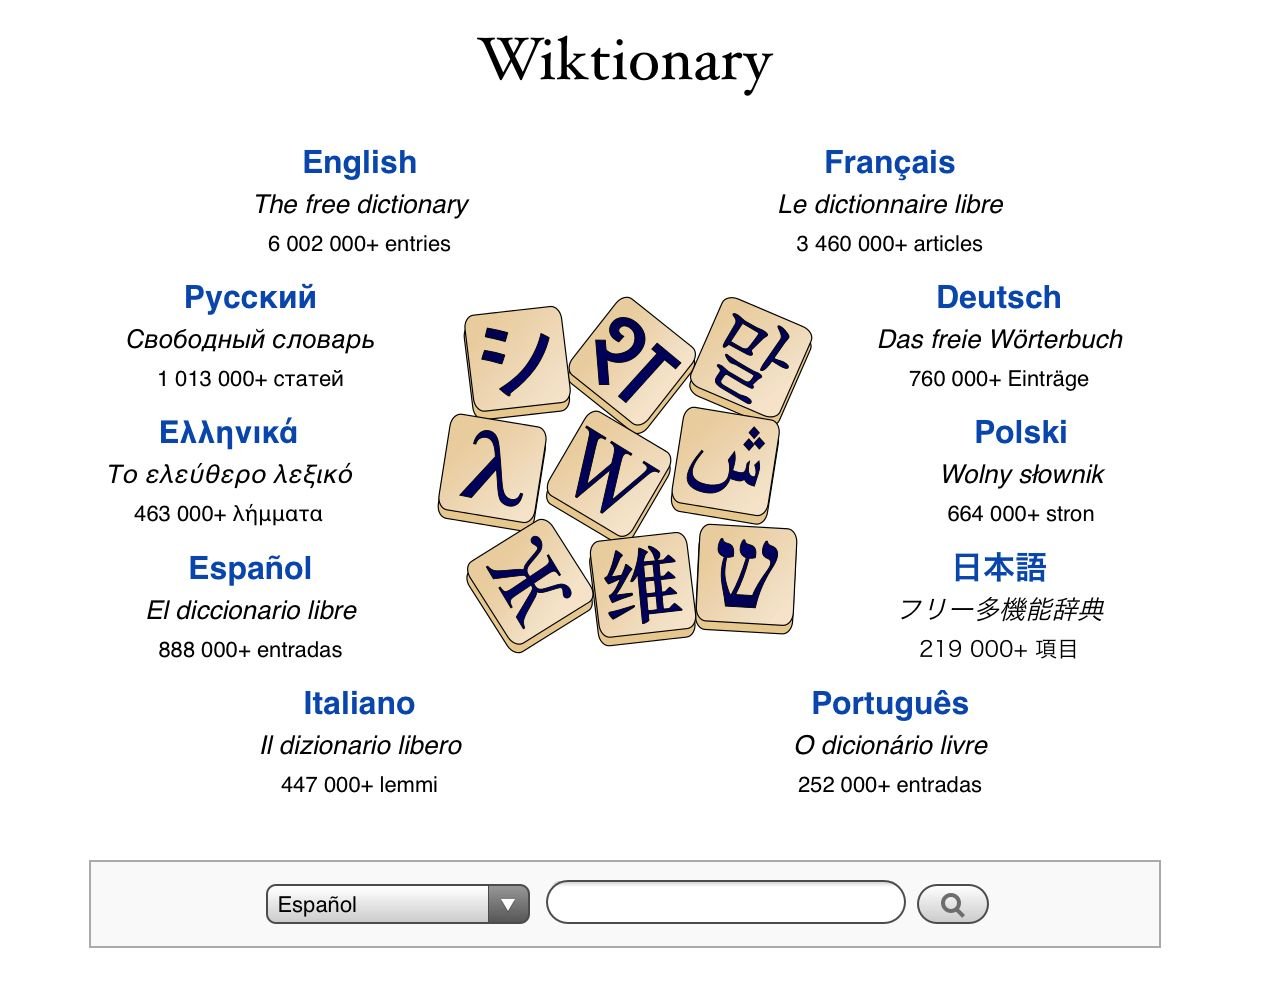 cúter - Wiktionary, the free dictionary